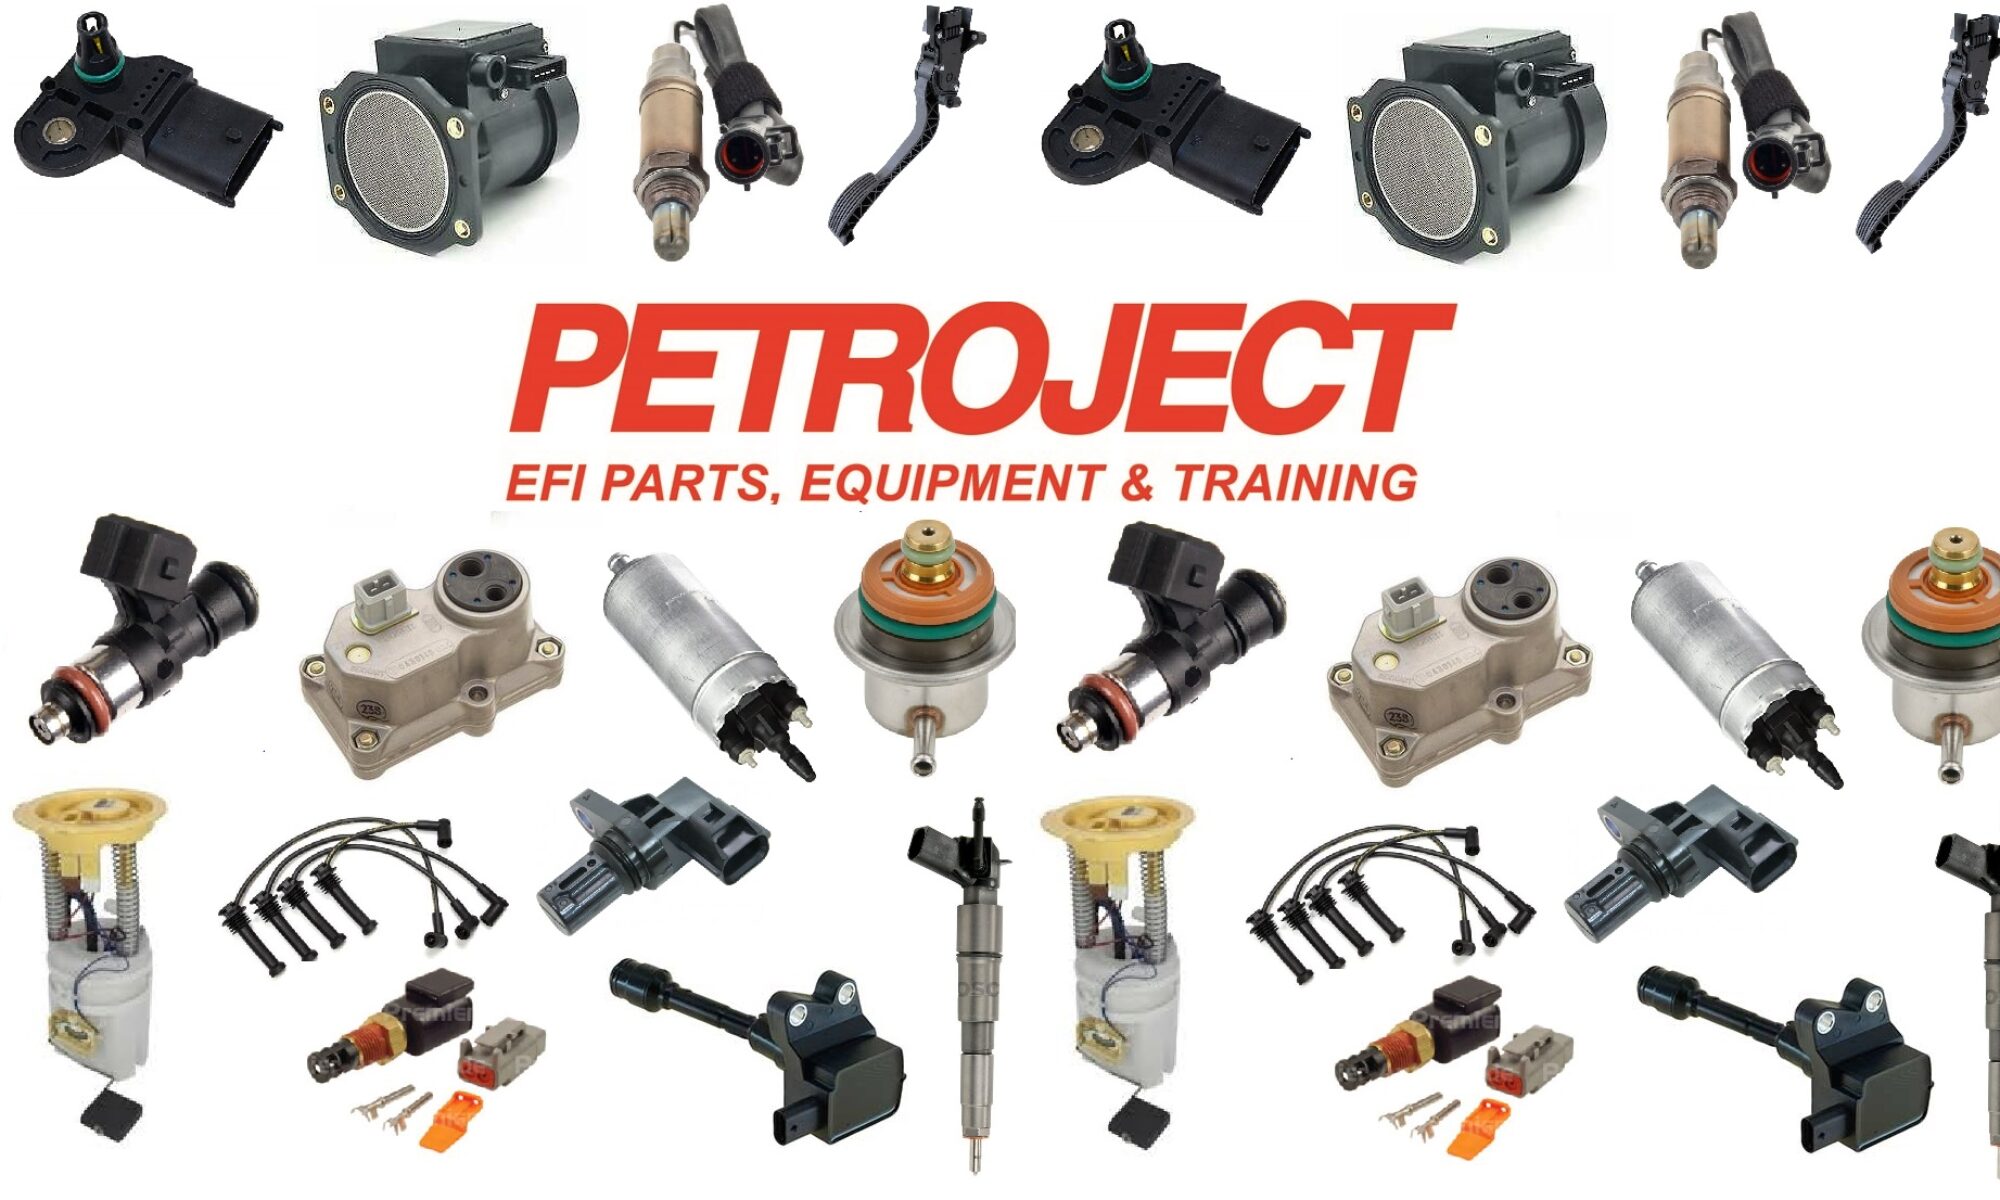 prodguniprobe03 Petroject. Auto Electrical parts